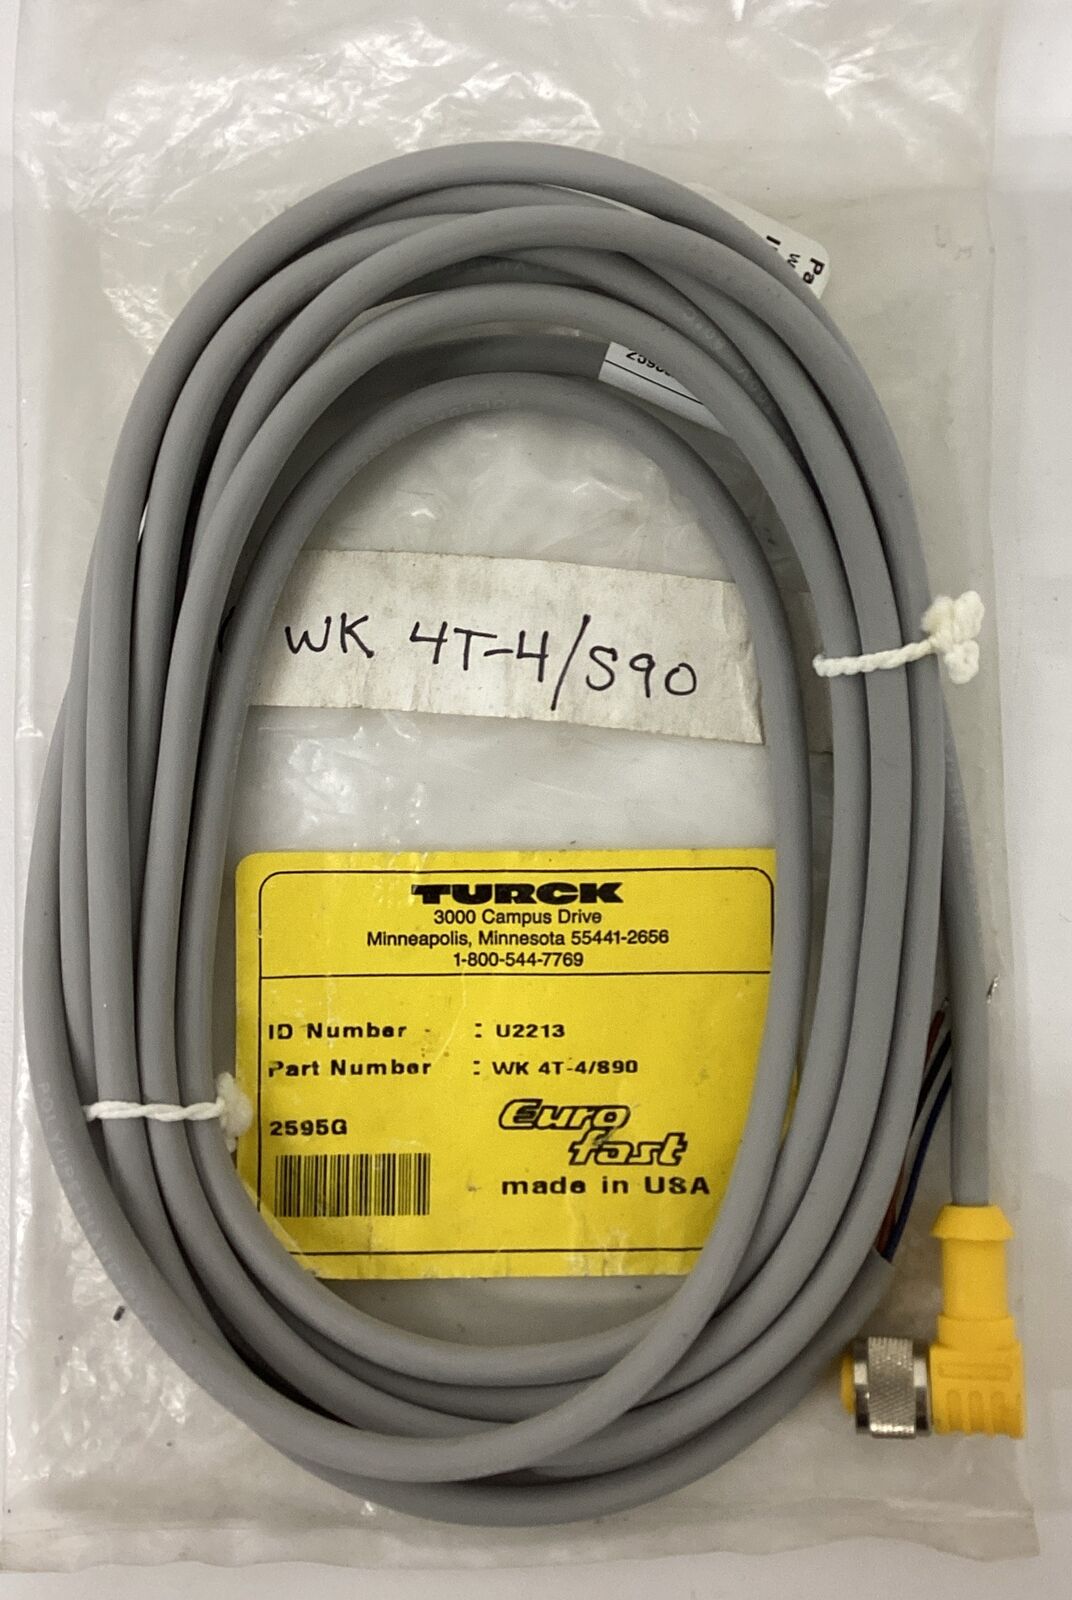 Turck WK4T-4/890 / U2213 M12 3-Wire Single End 90 Degree Cable 4M (RE150)